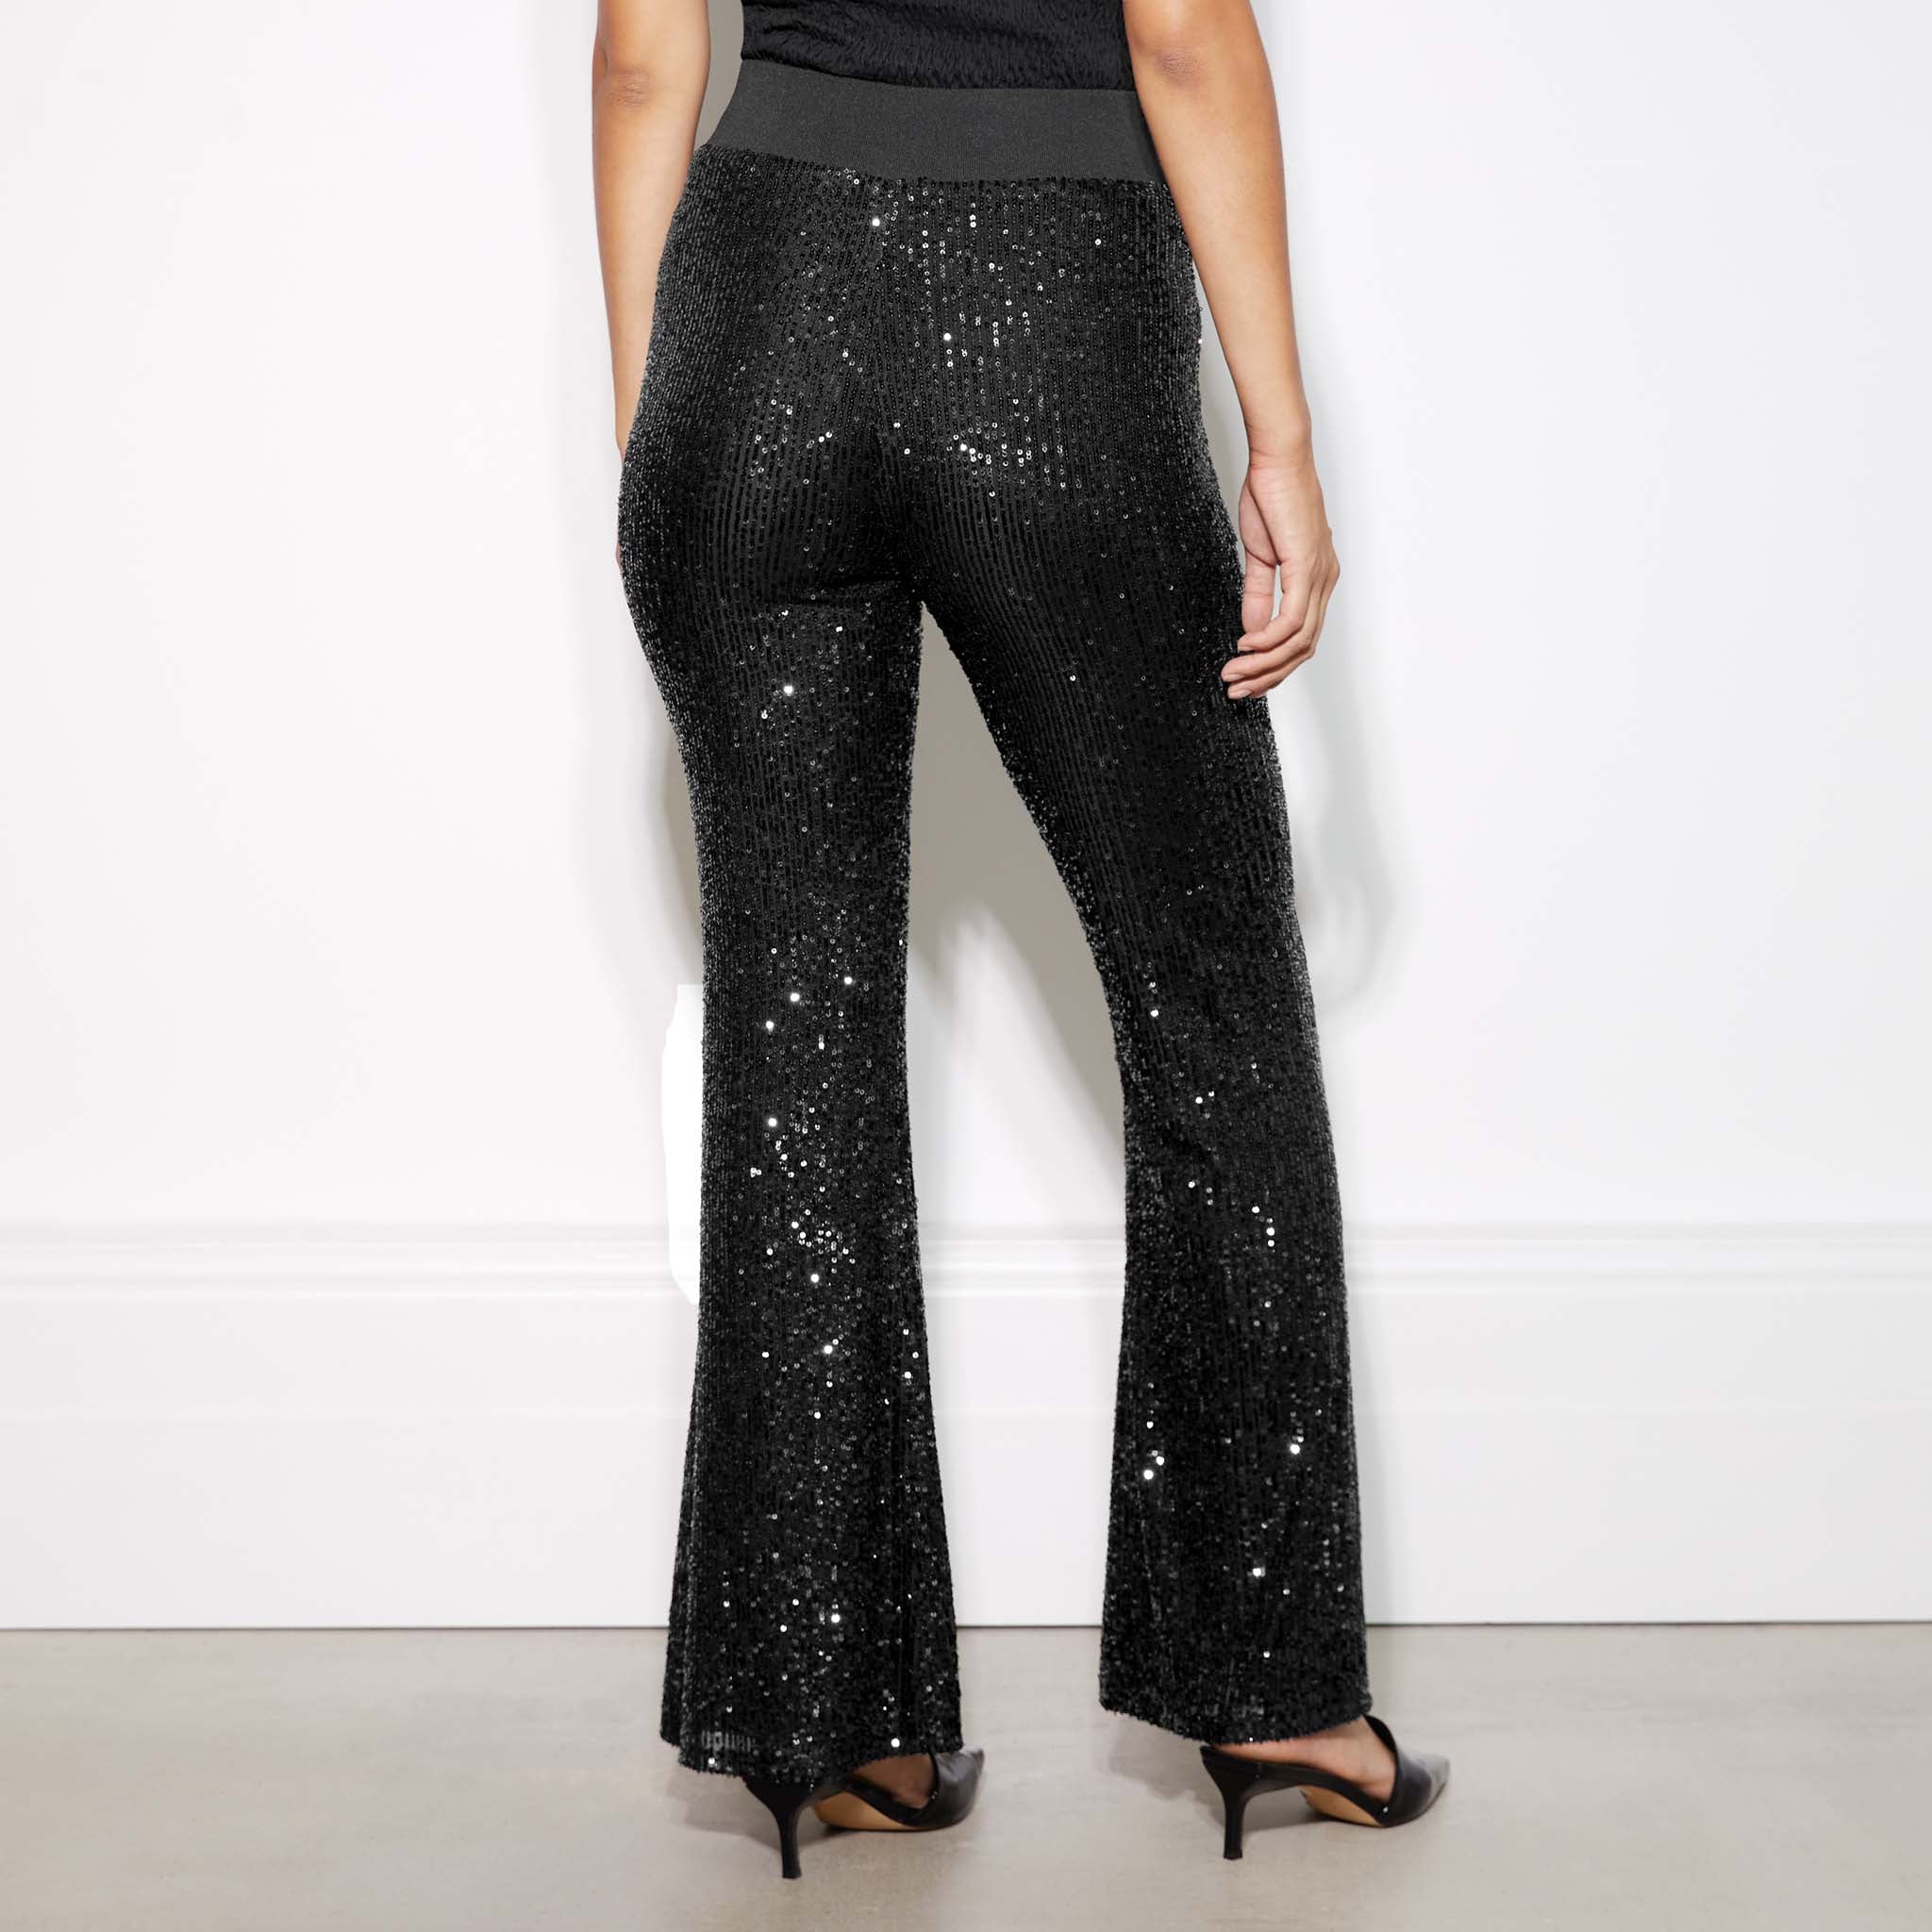 Womens Sequin Flare Pants High Waist Glitter Wide Leg Bell Bottom Leggings  Party Trousers (Black, S) at Amazon Women's Clothing store